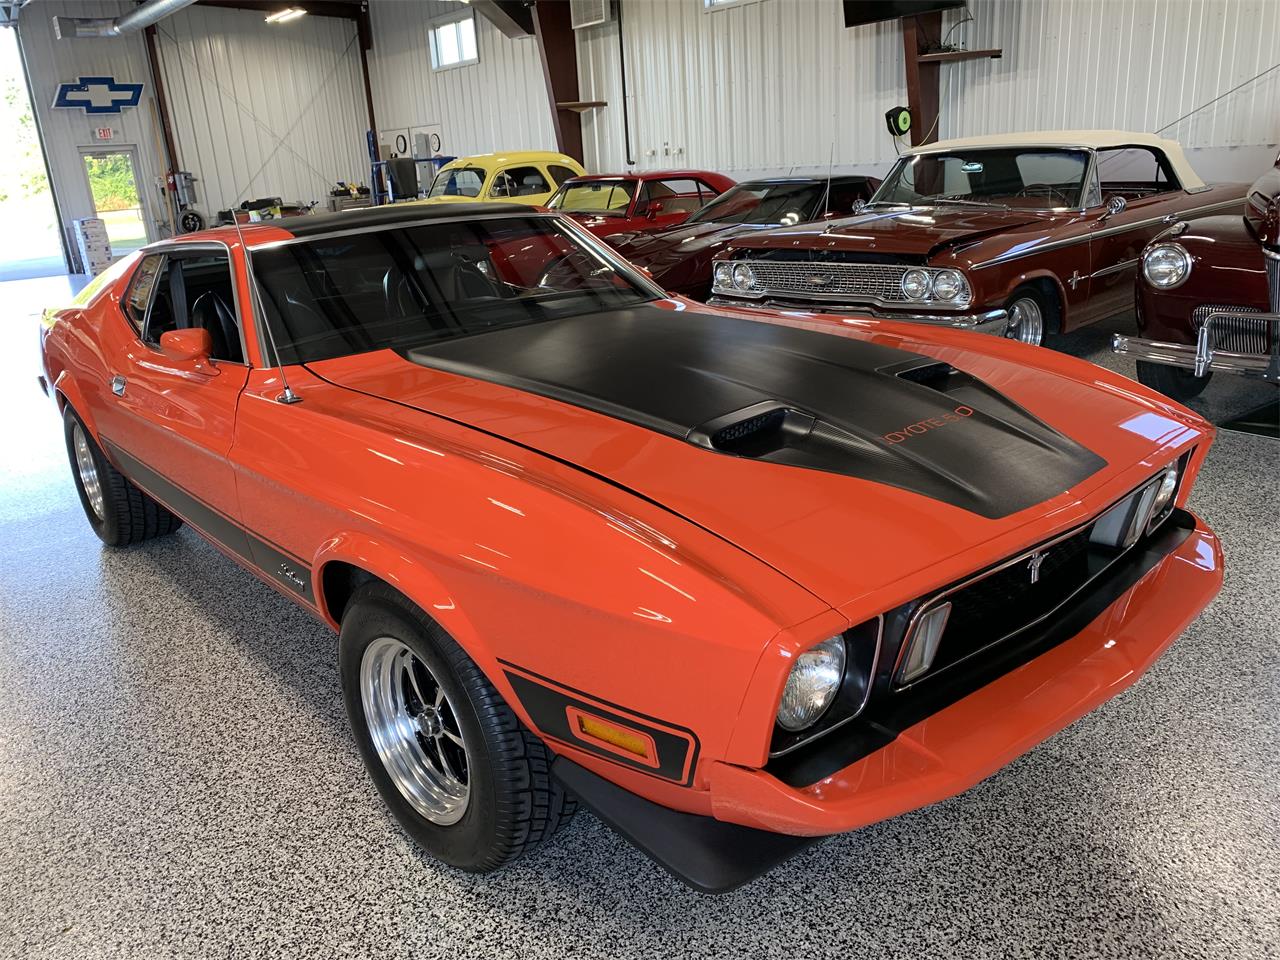 1973 Ford Mustang Mach 1 for Sale | ClassicCars.com | CC-1267258